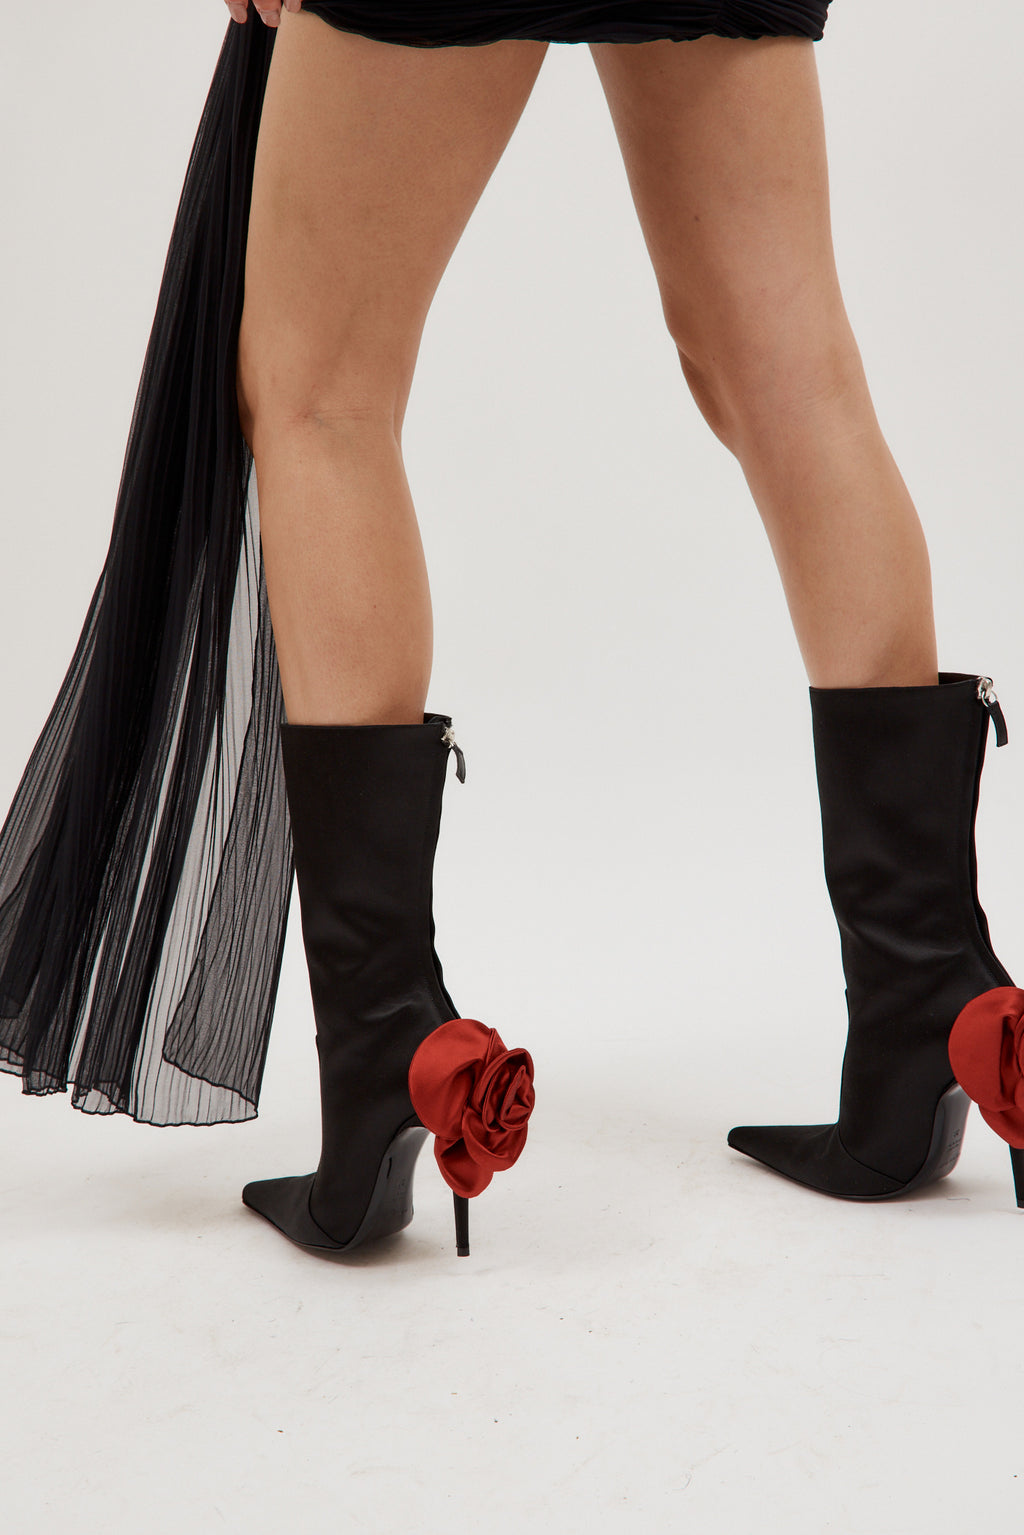 Pointed Toe Red Flower Black Boots